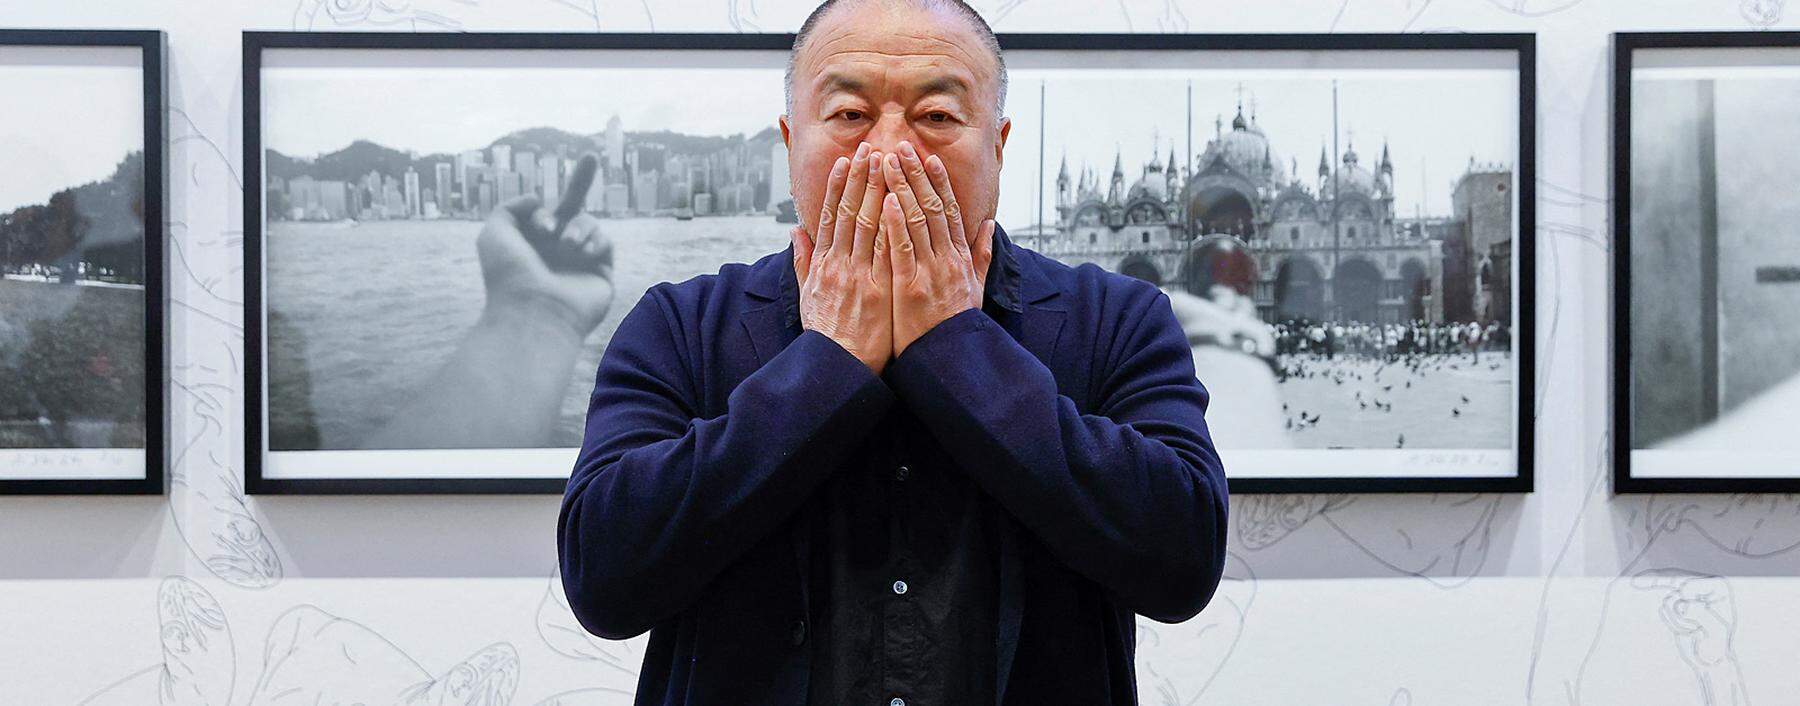 Chinese artist Ai Weiwei shows his exhibition ´In Search of Humanity´ in Vienna